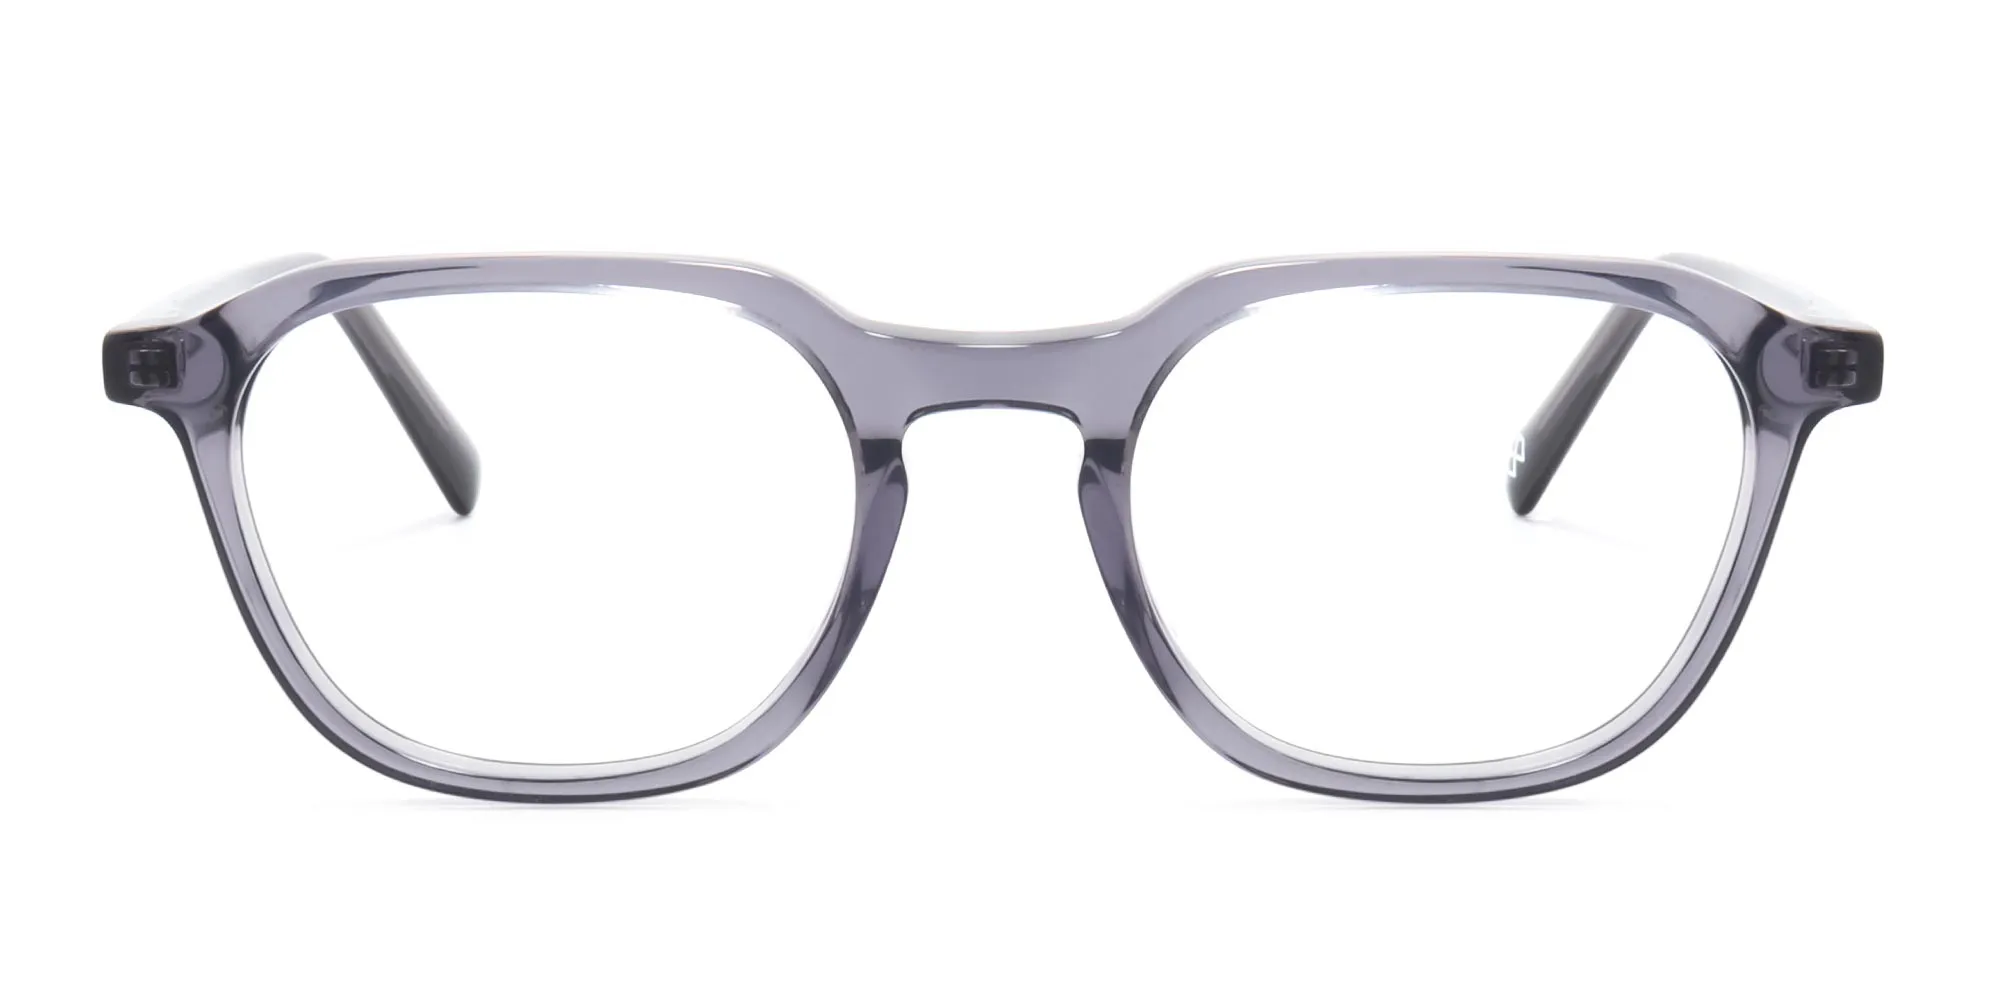 FULHAM 2 - See Through Glasses | Specscart.®